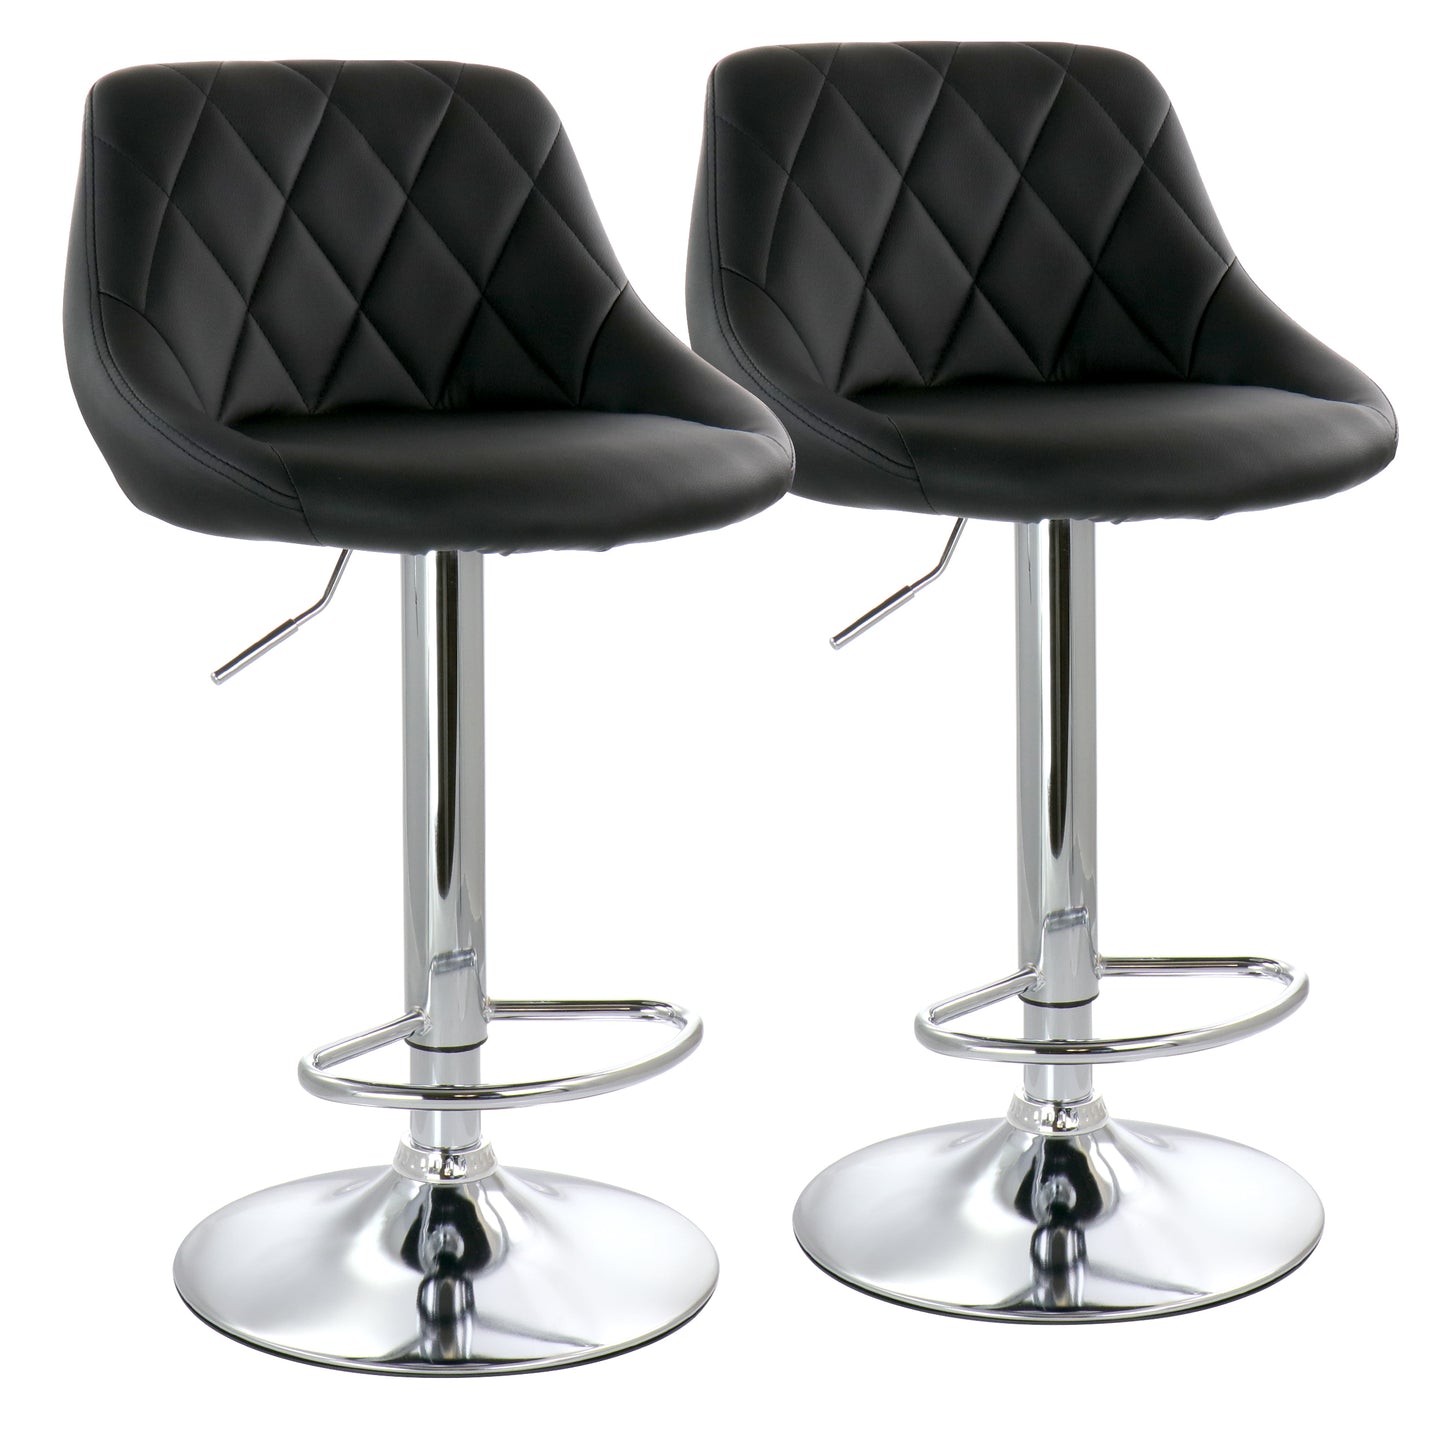 ELAMA Elama 2 Piece Diamond Stitched Faux Leather Bar Stool in Black with Chrome Base and Adjustable Height